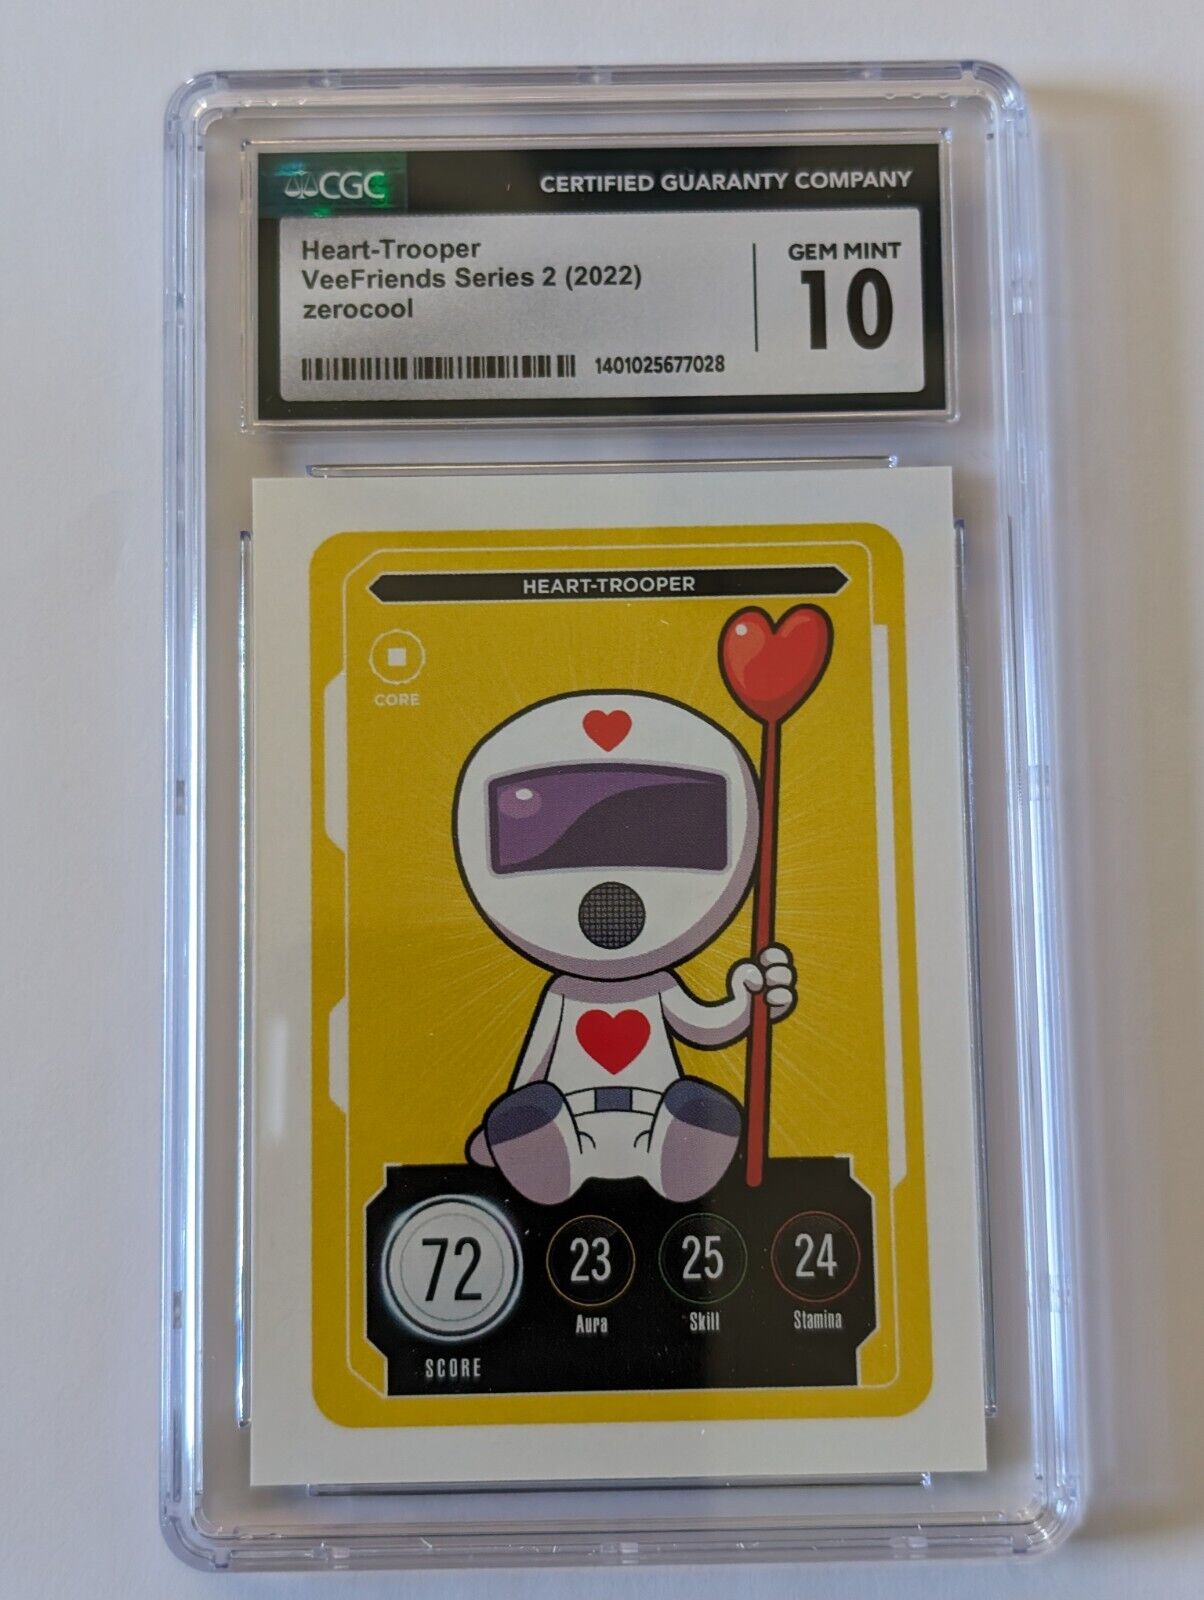 Heart-Trooper CGC 10 Gem Mint VeeFriends Series 2 Compete and Collect